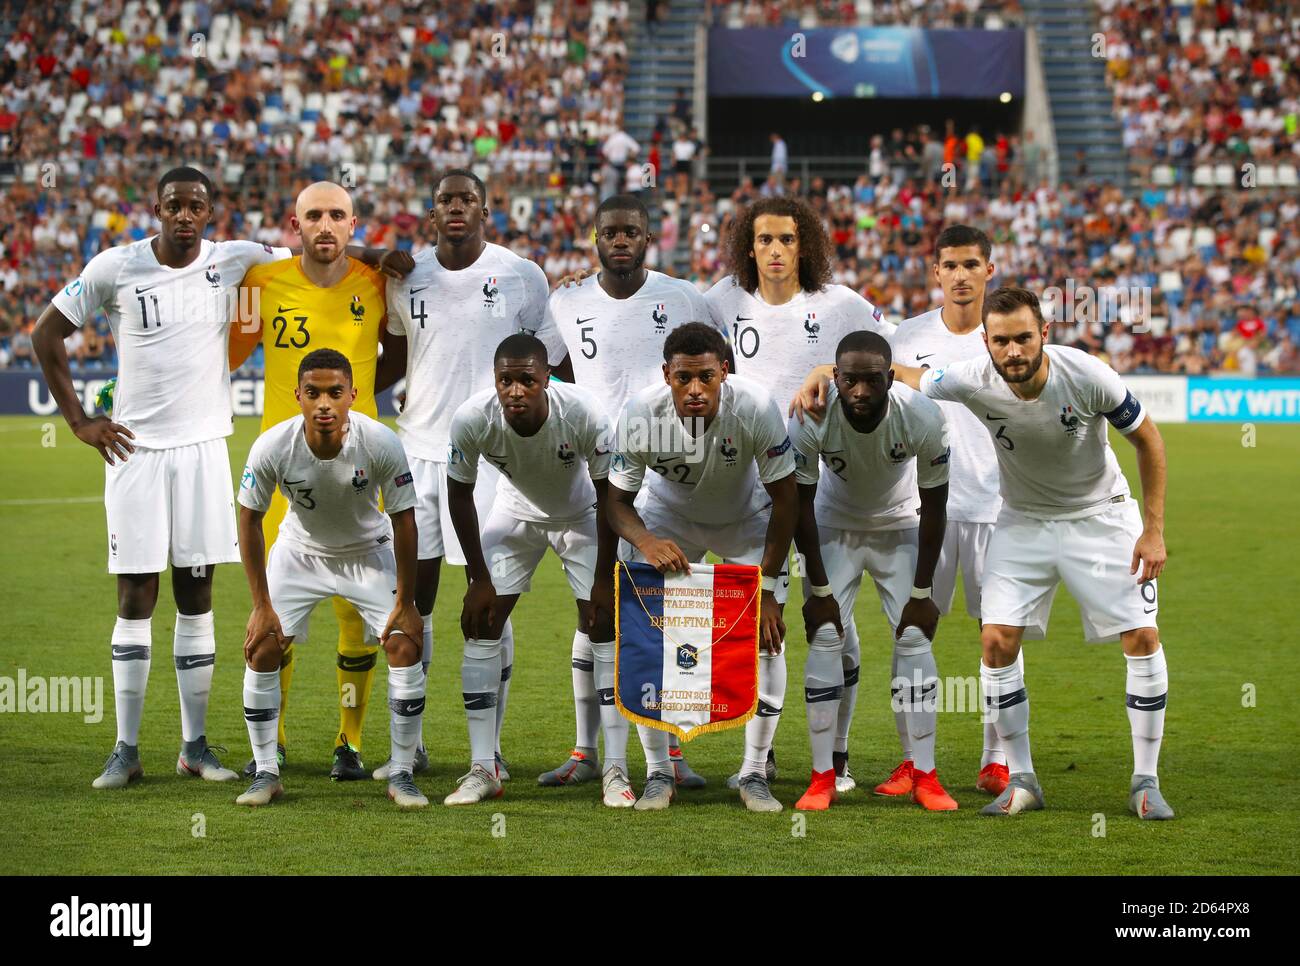 France U21 Football Team High Resolution Stock Photography And Images Alamy